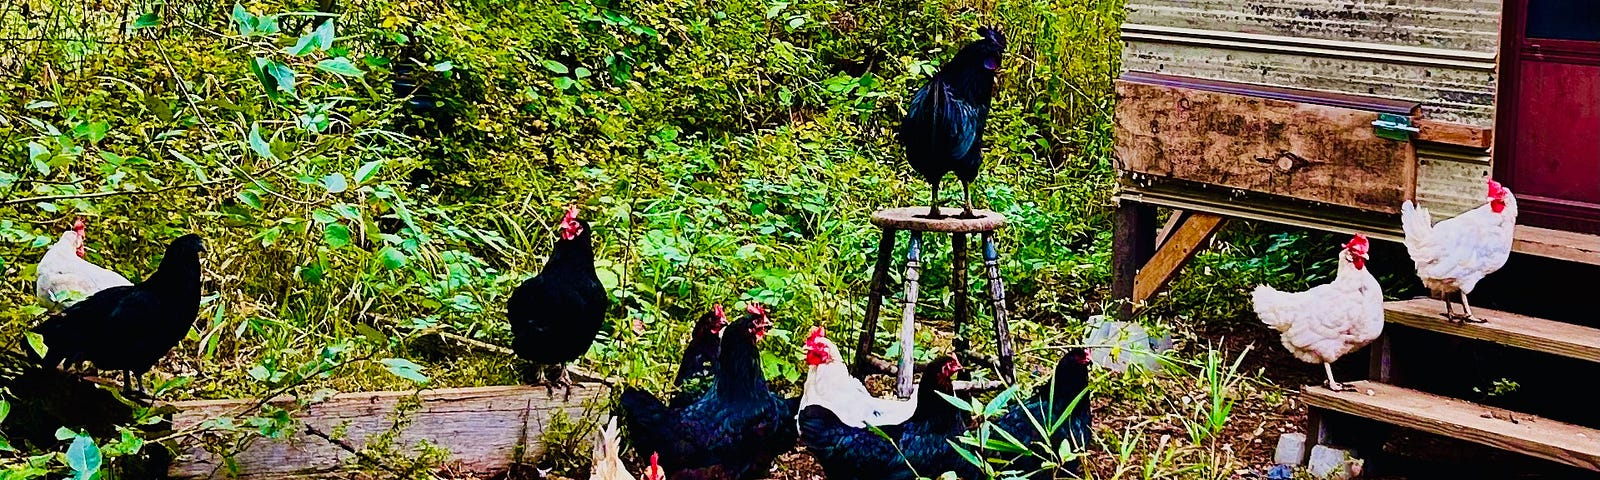 Chickens roam a grassy yard. One of them stands on a stool. A small building is in the corner of the photo.